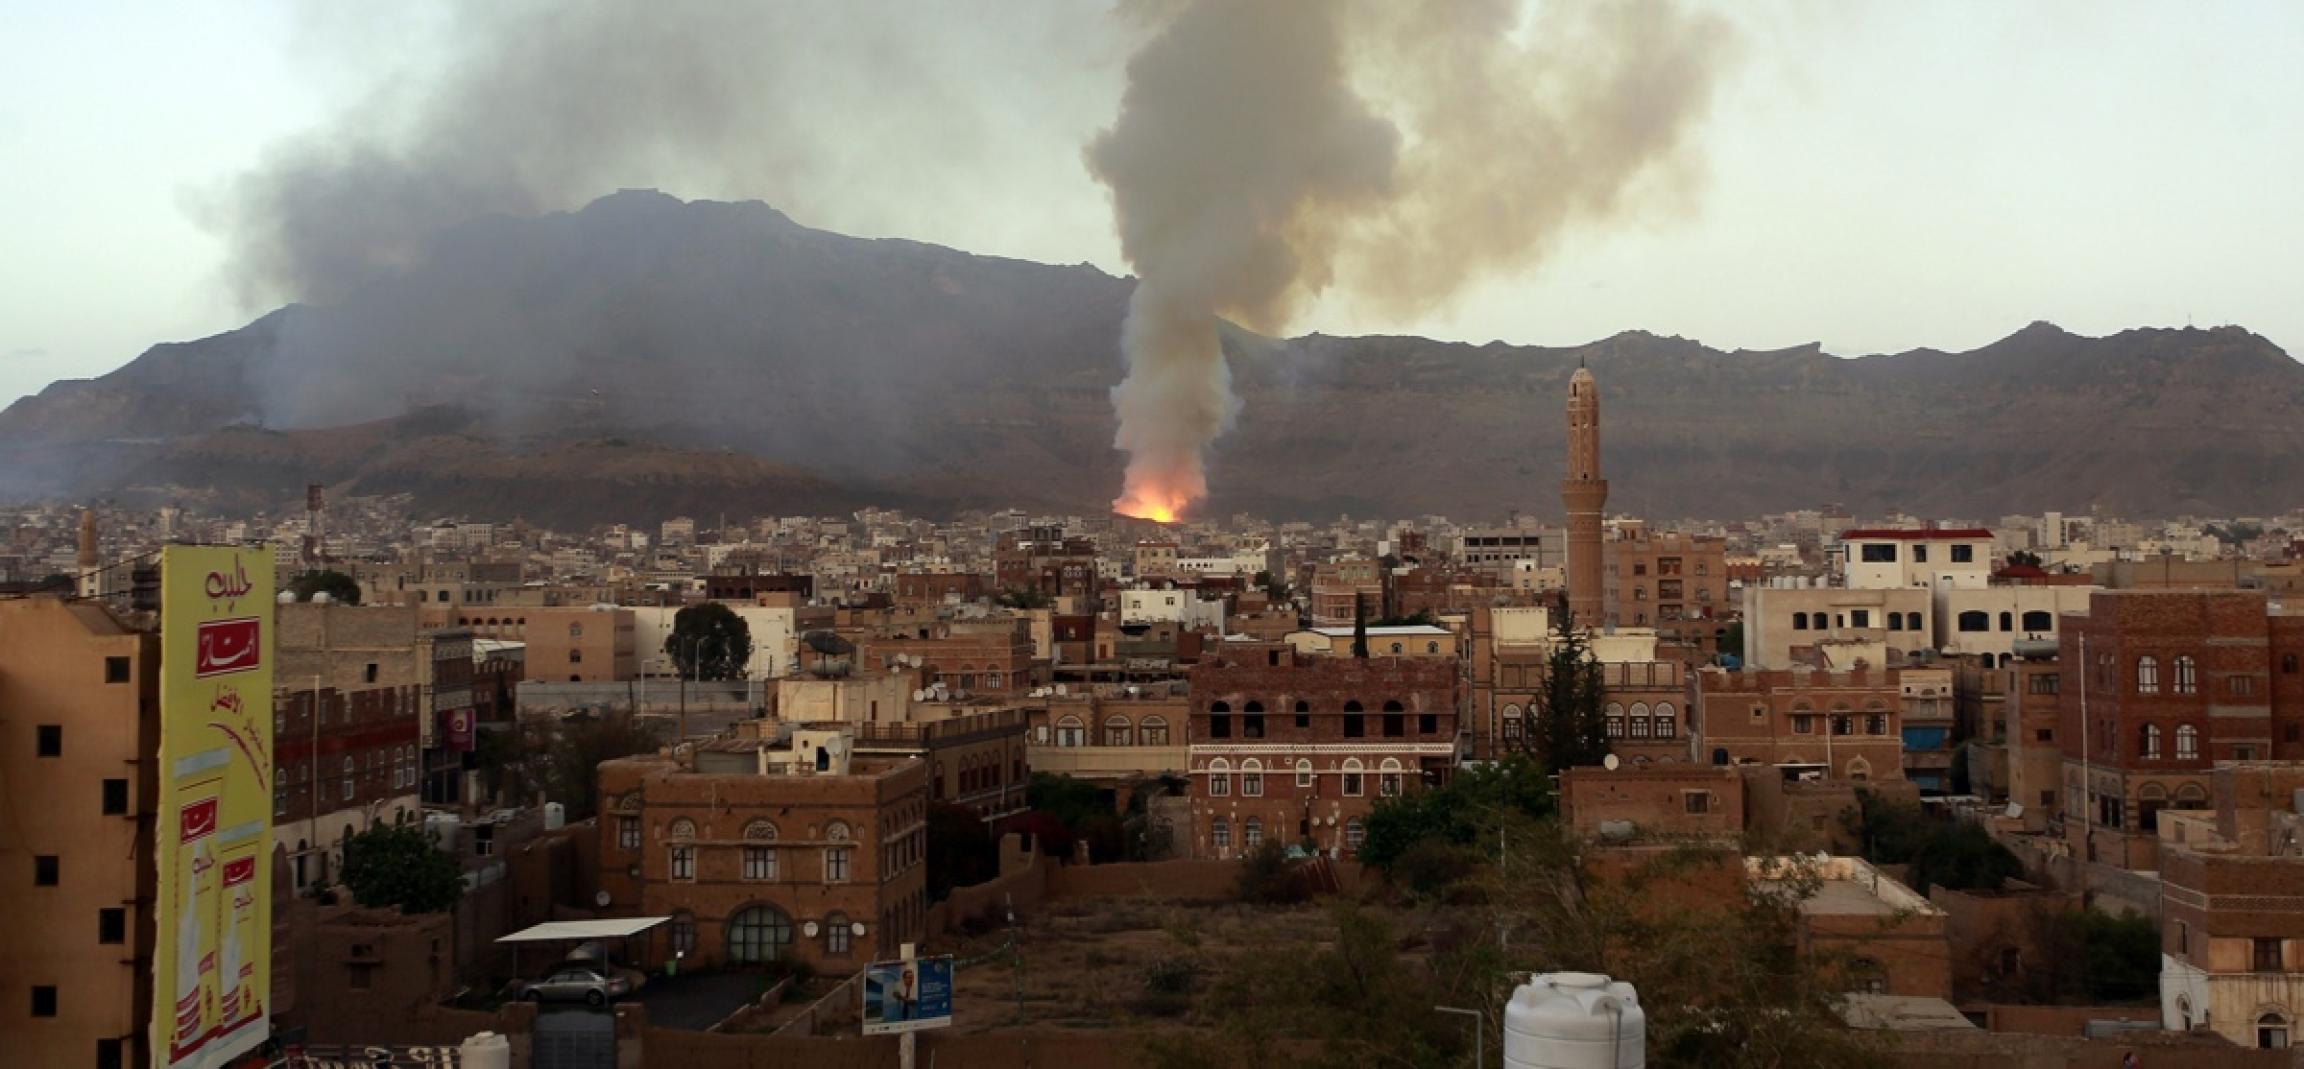 Smoke billows following an airstrike by the Saudi-led coalition on May 11, 2015, in the Yemeni capital, Sanaa. (AFP/Getty Images)